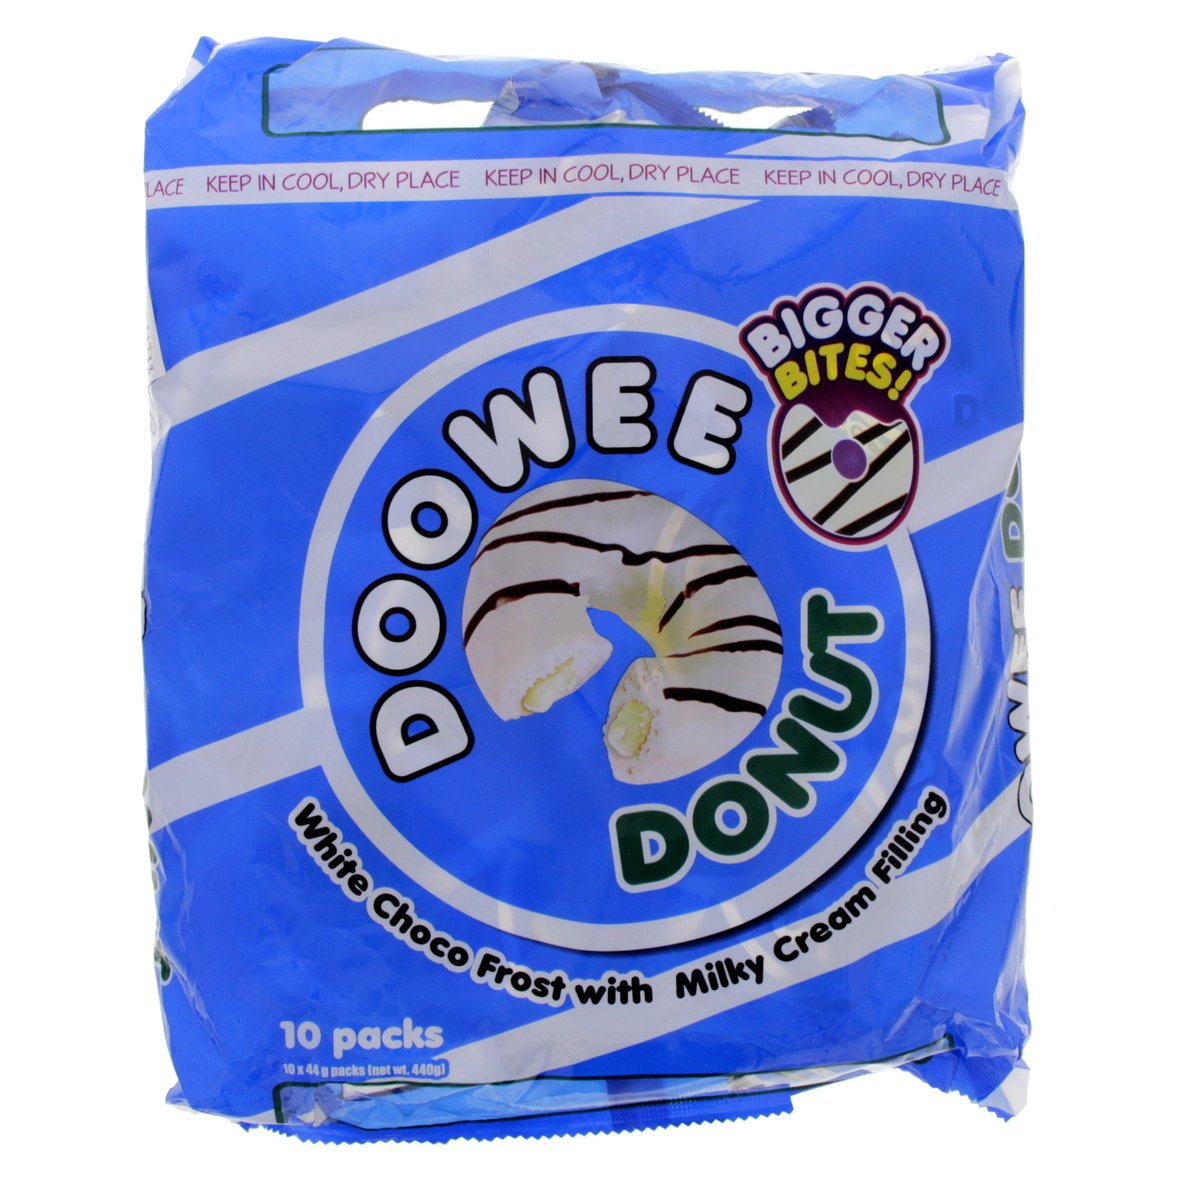 Doowee Donut White Choco Frost With Milky Cream Filling 10 x 44 g